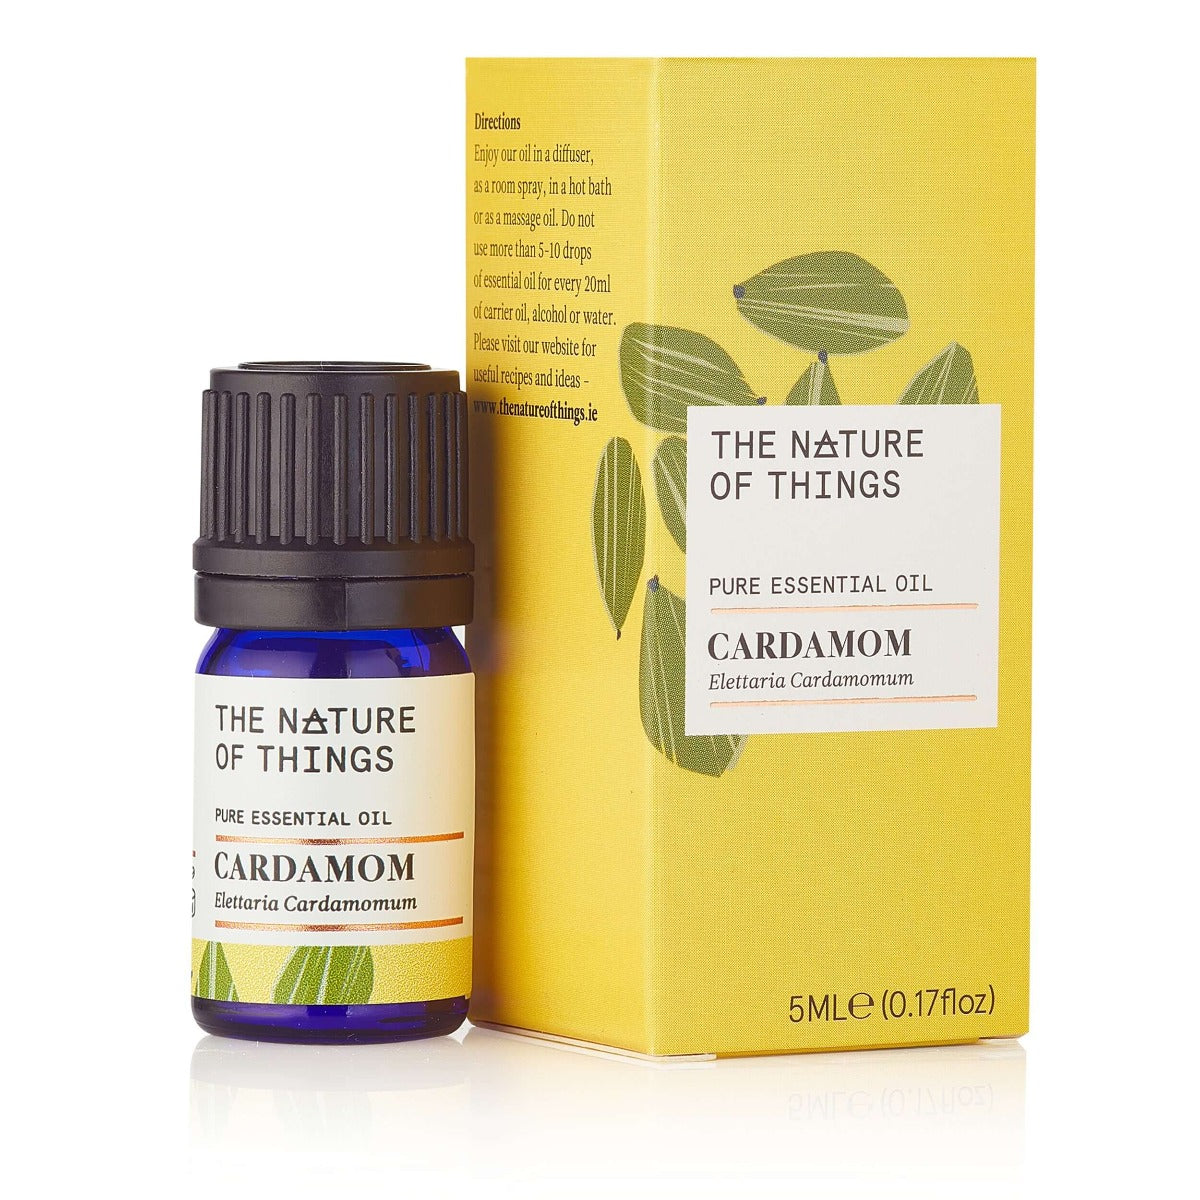 Cardamom Essential Oil from The Nature of Things